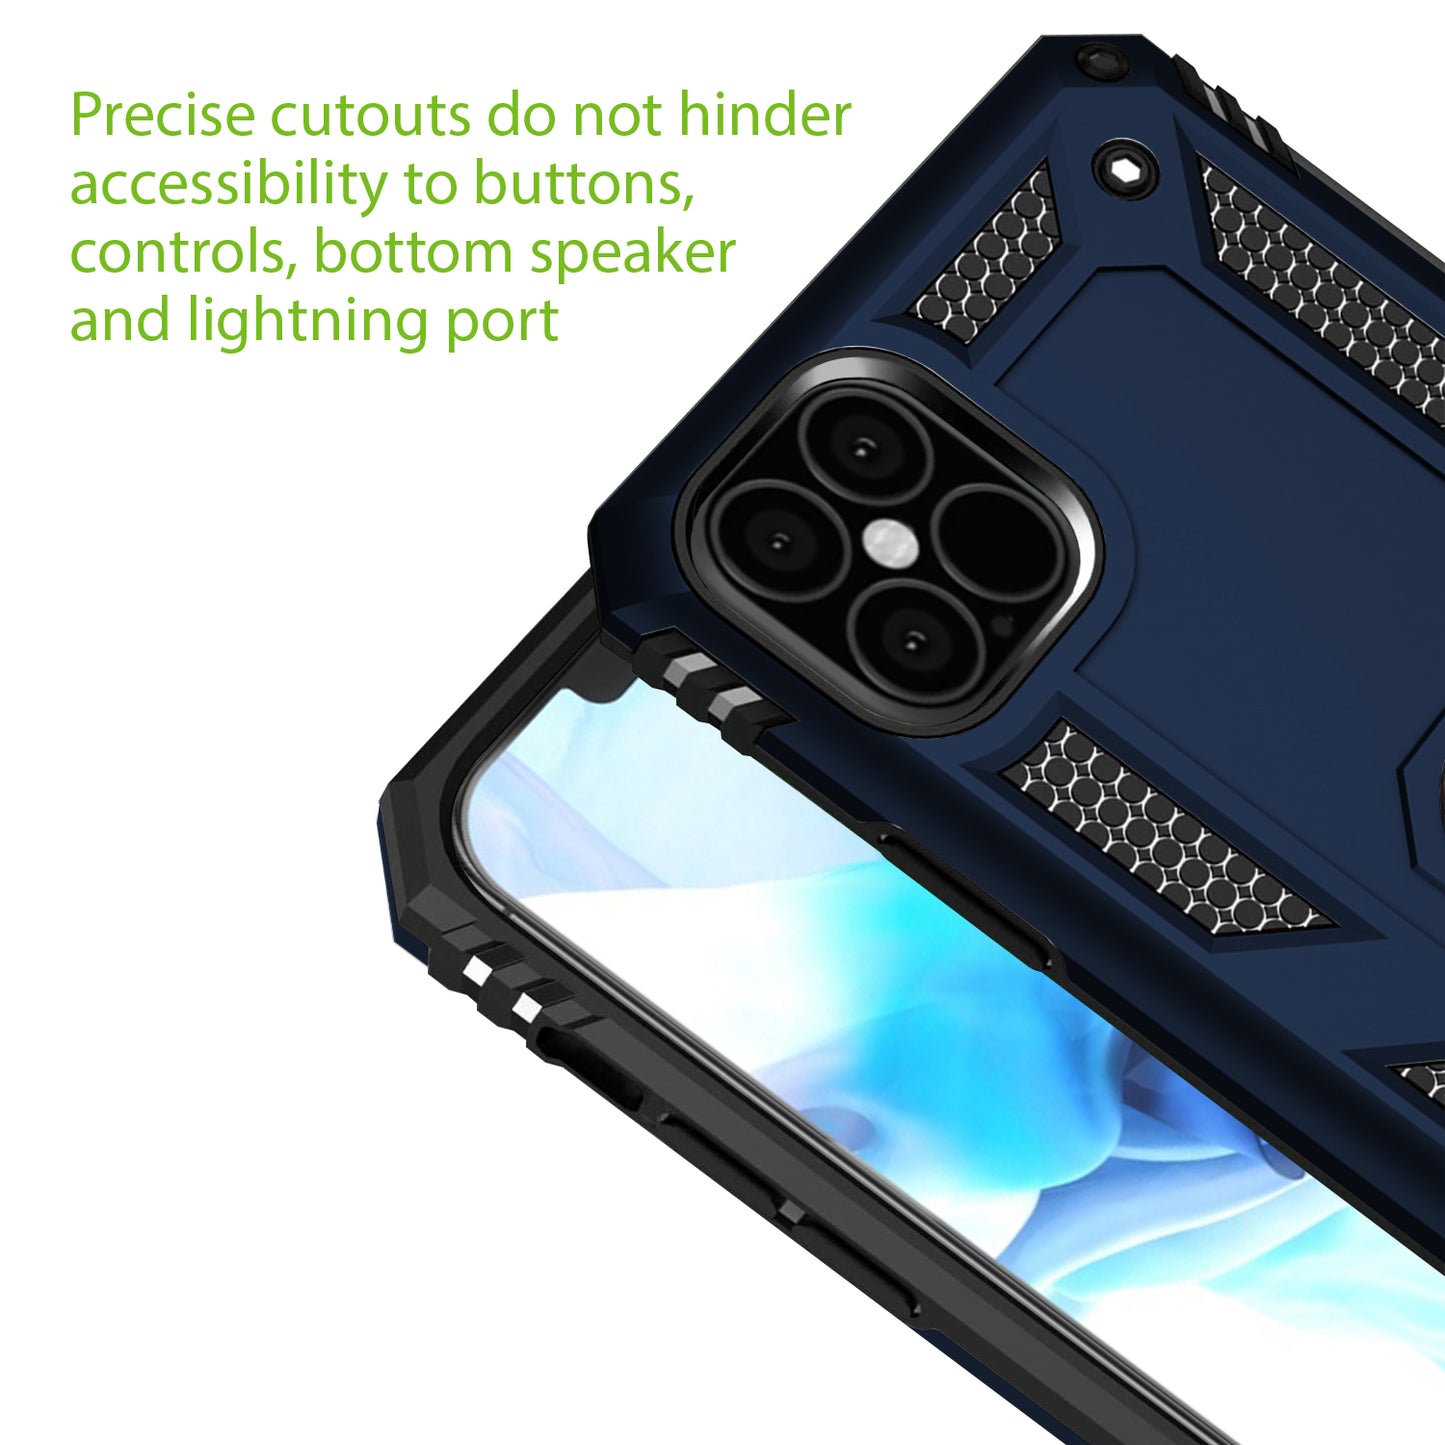 CCIPH12PMIFBL - Shockproof Case with Built in Ring, Kickstand and Magnet for Car Mounts Compatible to Apple iPhone 12 Pro Max